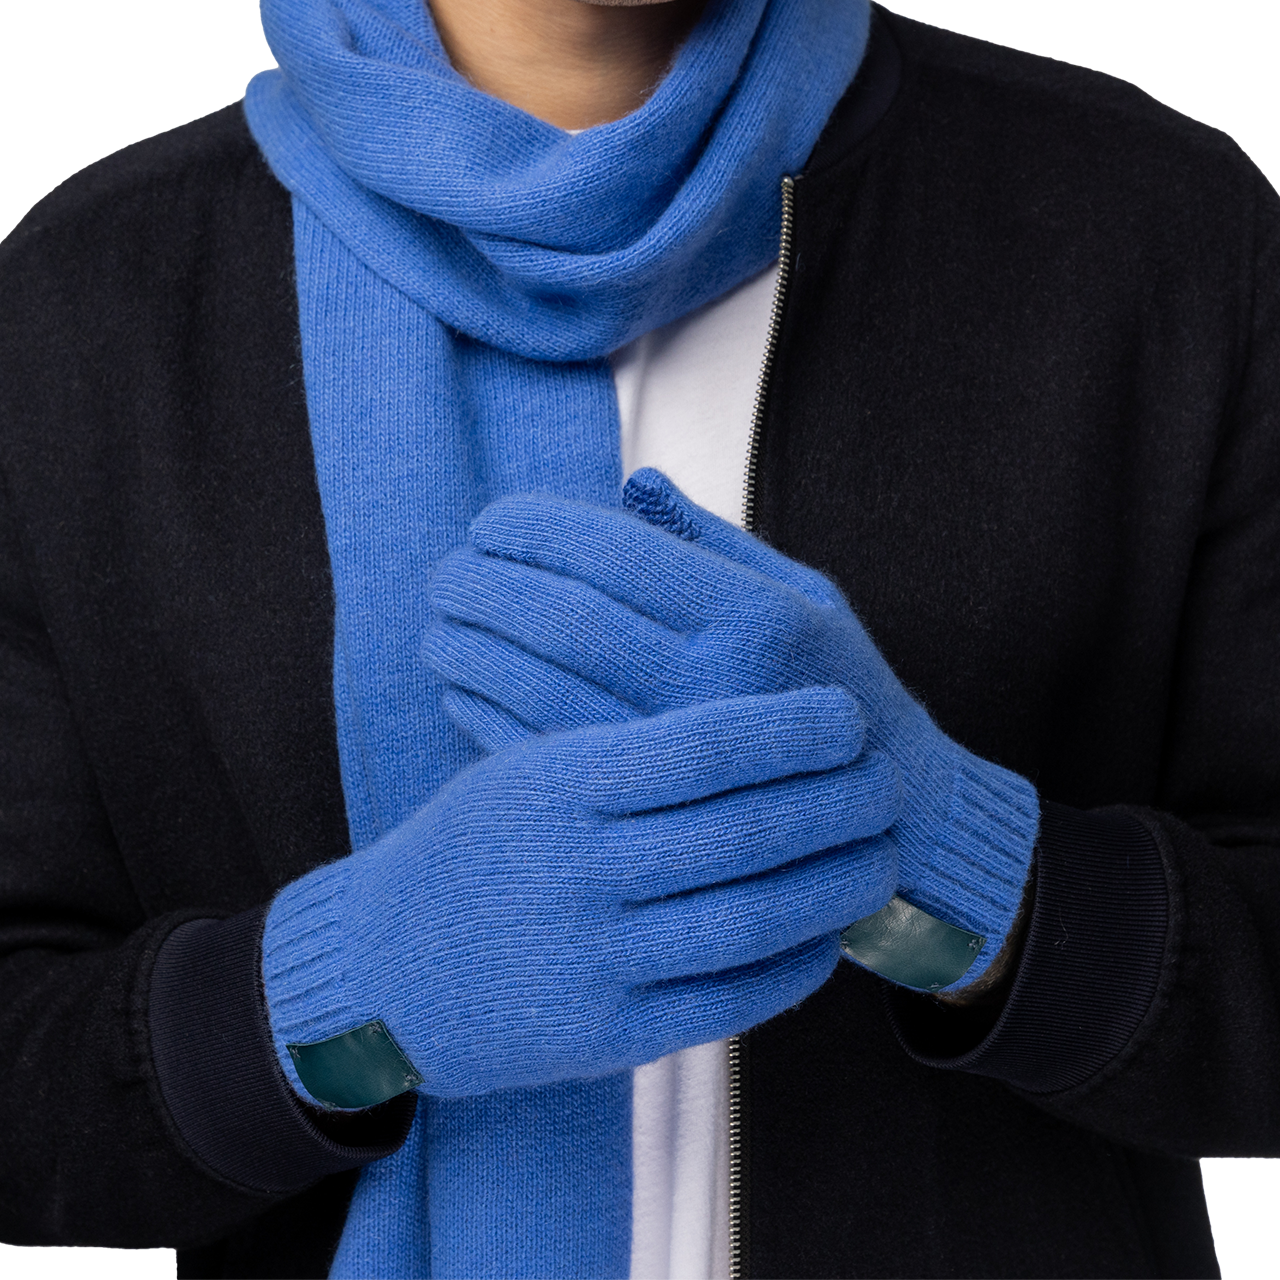 Cashmere Ribbed Gloves with Leather Tab and Touchscreen Sensitive - Cobalt Blue